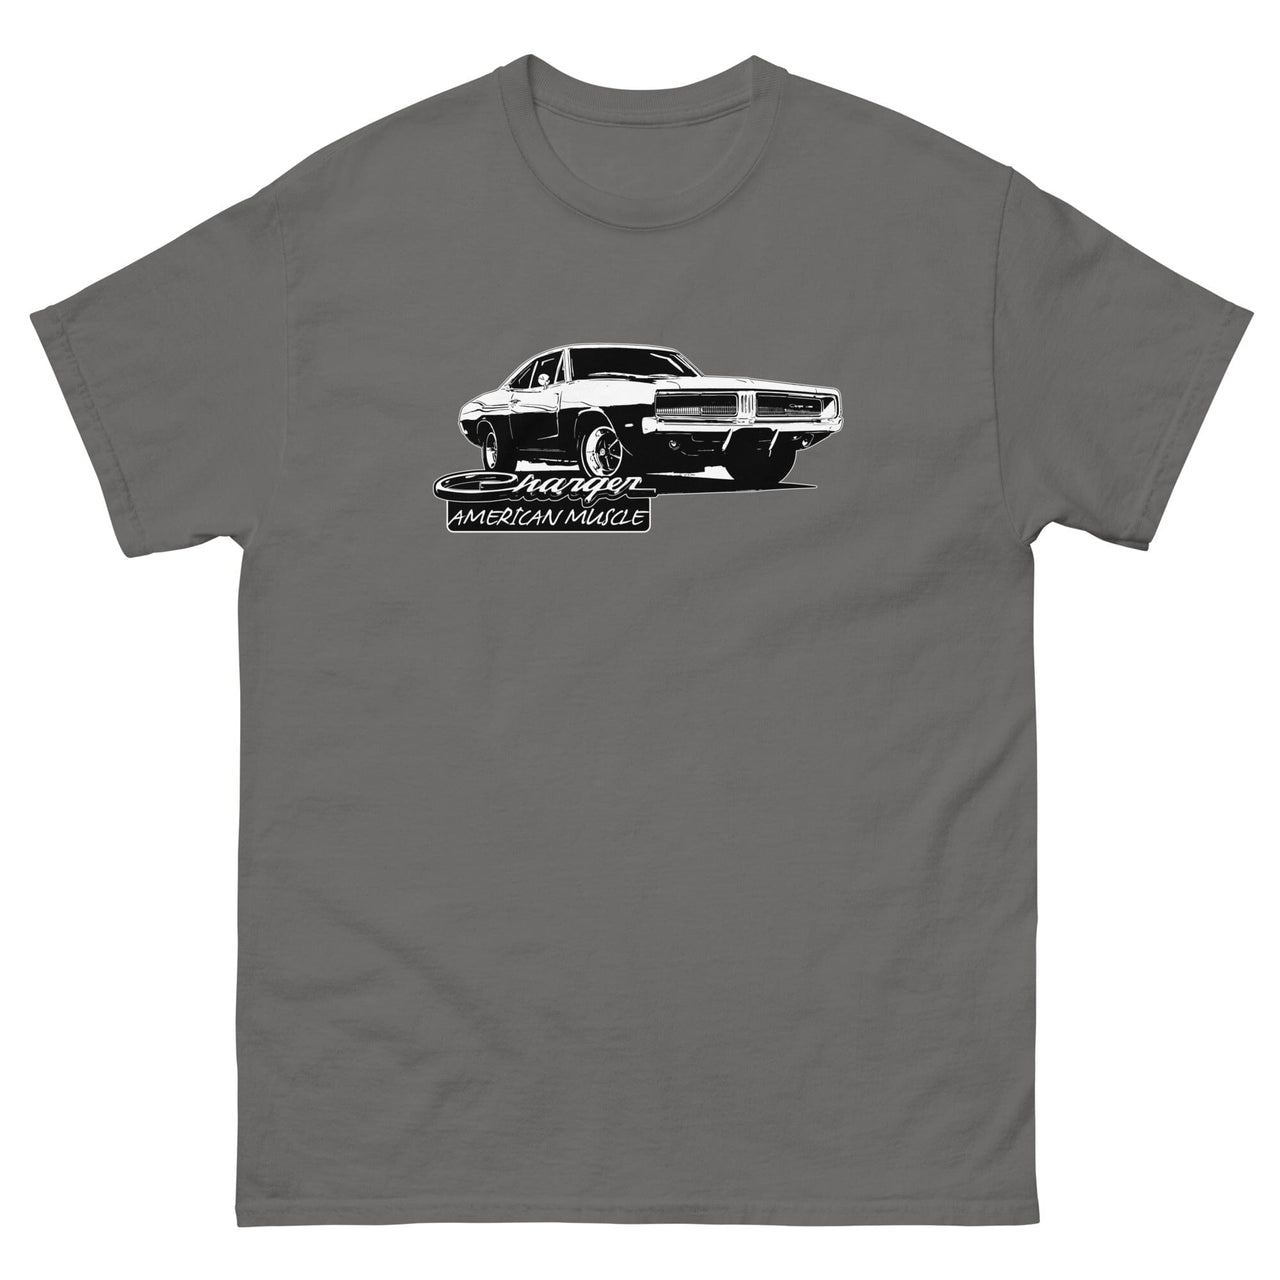 1969 Charger T-Shirt From Aggressive Thread - Color Grey